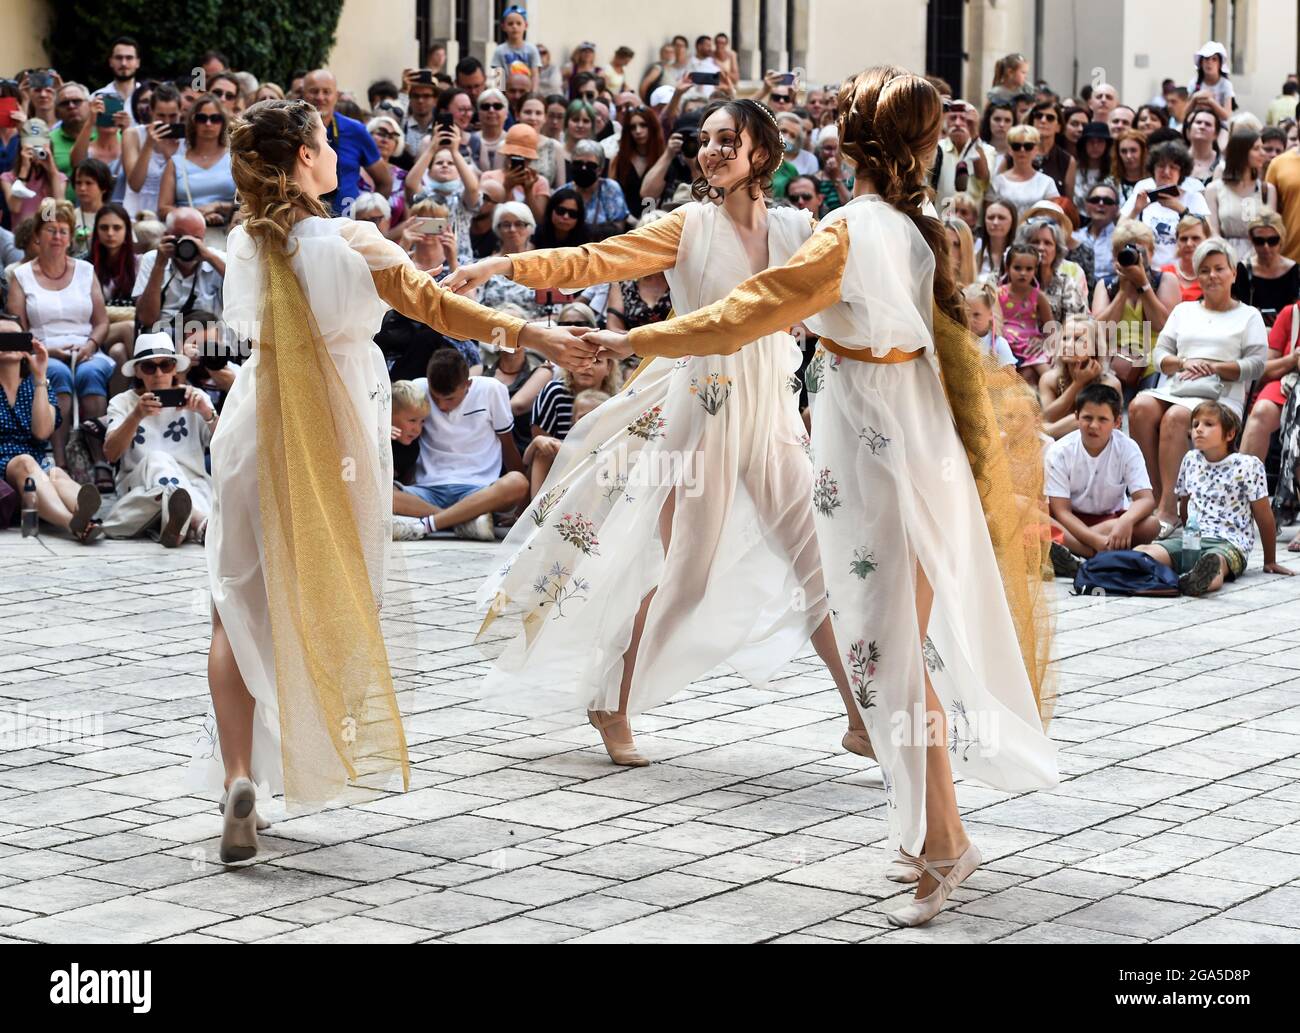 Krakow, Poland. 24th July, 2021. Performers dancing on stage during the fashion show.Dancers from the Terpsichore Dance Theatre and actors from Nomina Rosae Teatr presented a reconstruction of Renaissance fashion in the courtyard of the Wawel Royal Castle in Krakow. (Credit Image: © Alex Bona/SOPA Images via ZUMA Press Wire) Stock Photo